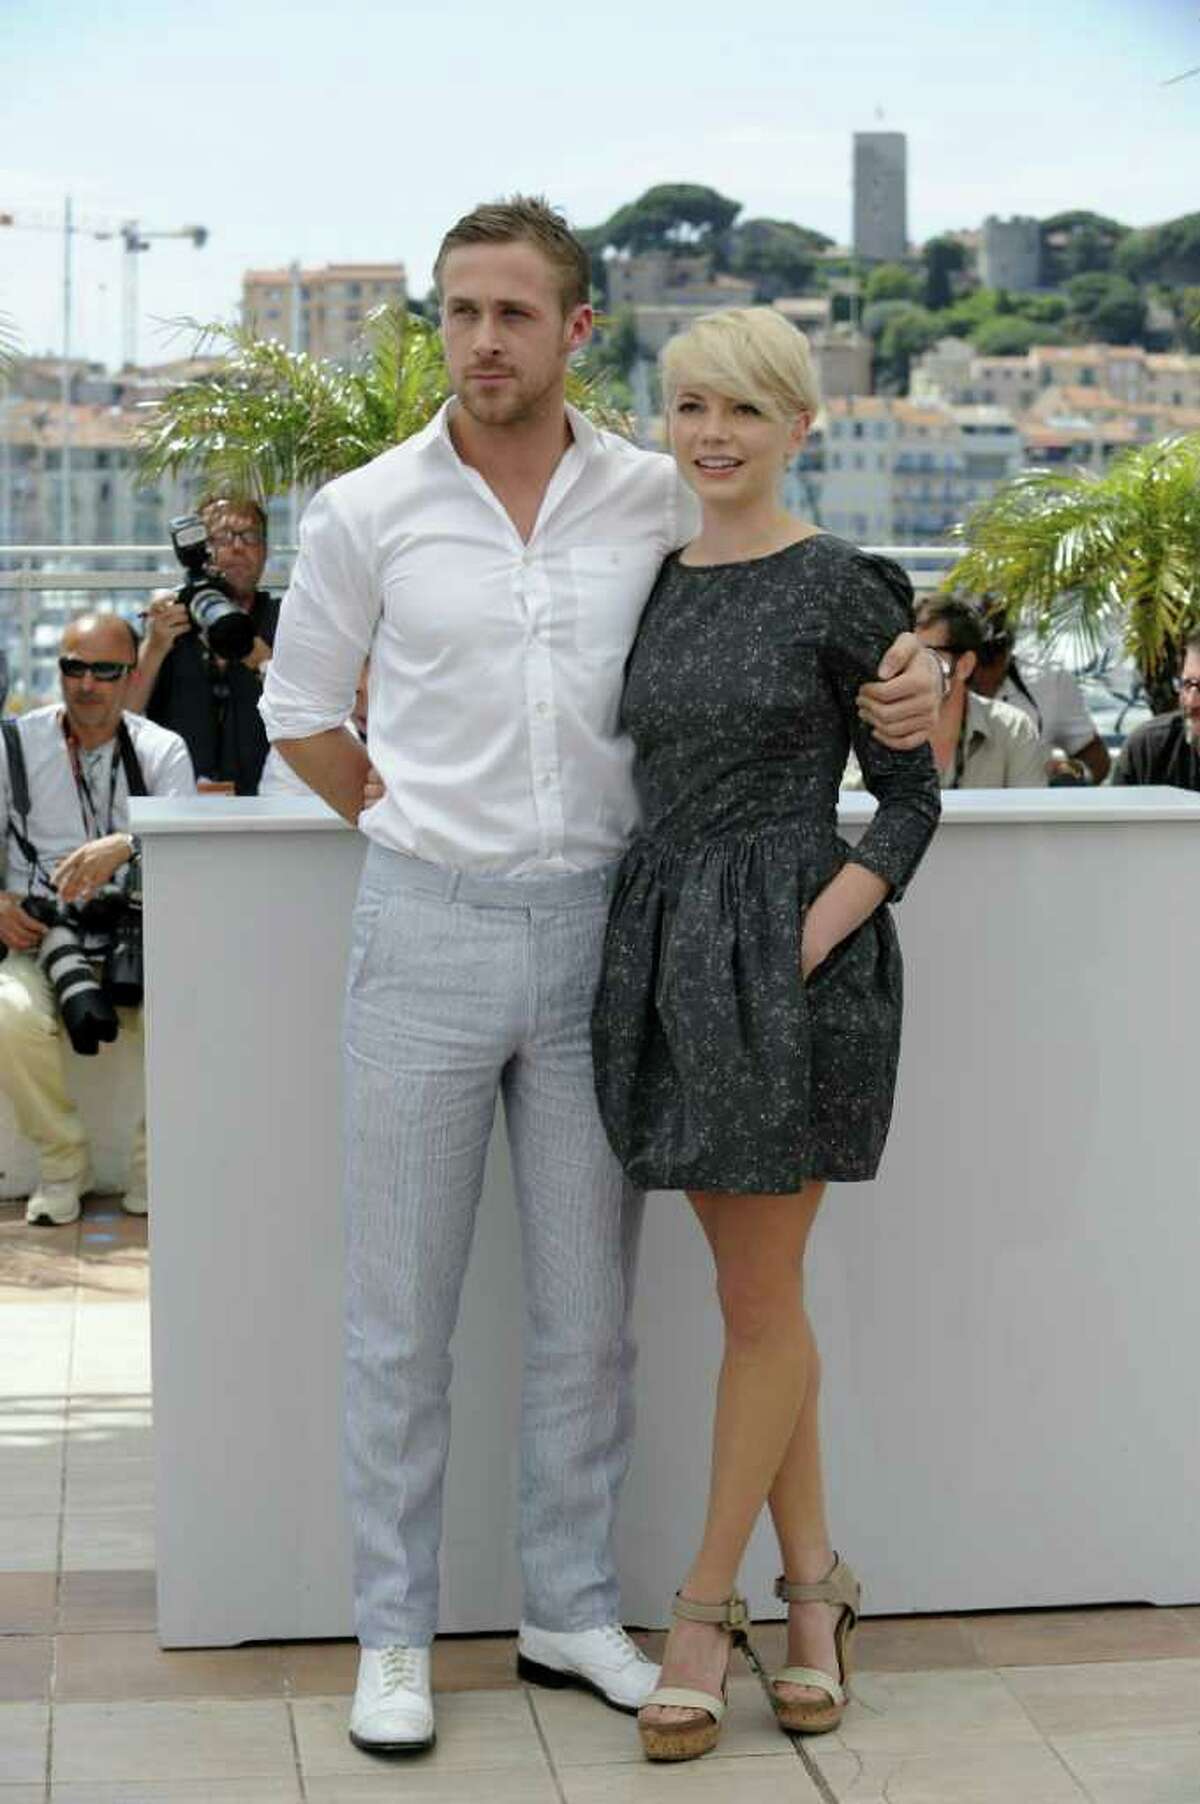 US actress Michelle Williams and Canadian actor Ryan Gosling pose during the photocall of "Blue Valentine" presented in the Un Certain Regard selection at the 63rd Cannes Film Festival on May 18, 2010, in Cannes. (AFP/Getty Images)